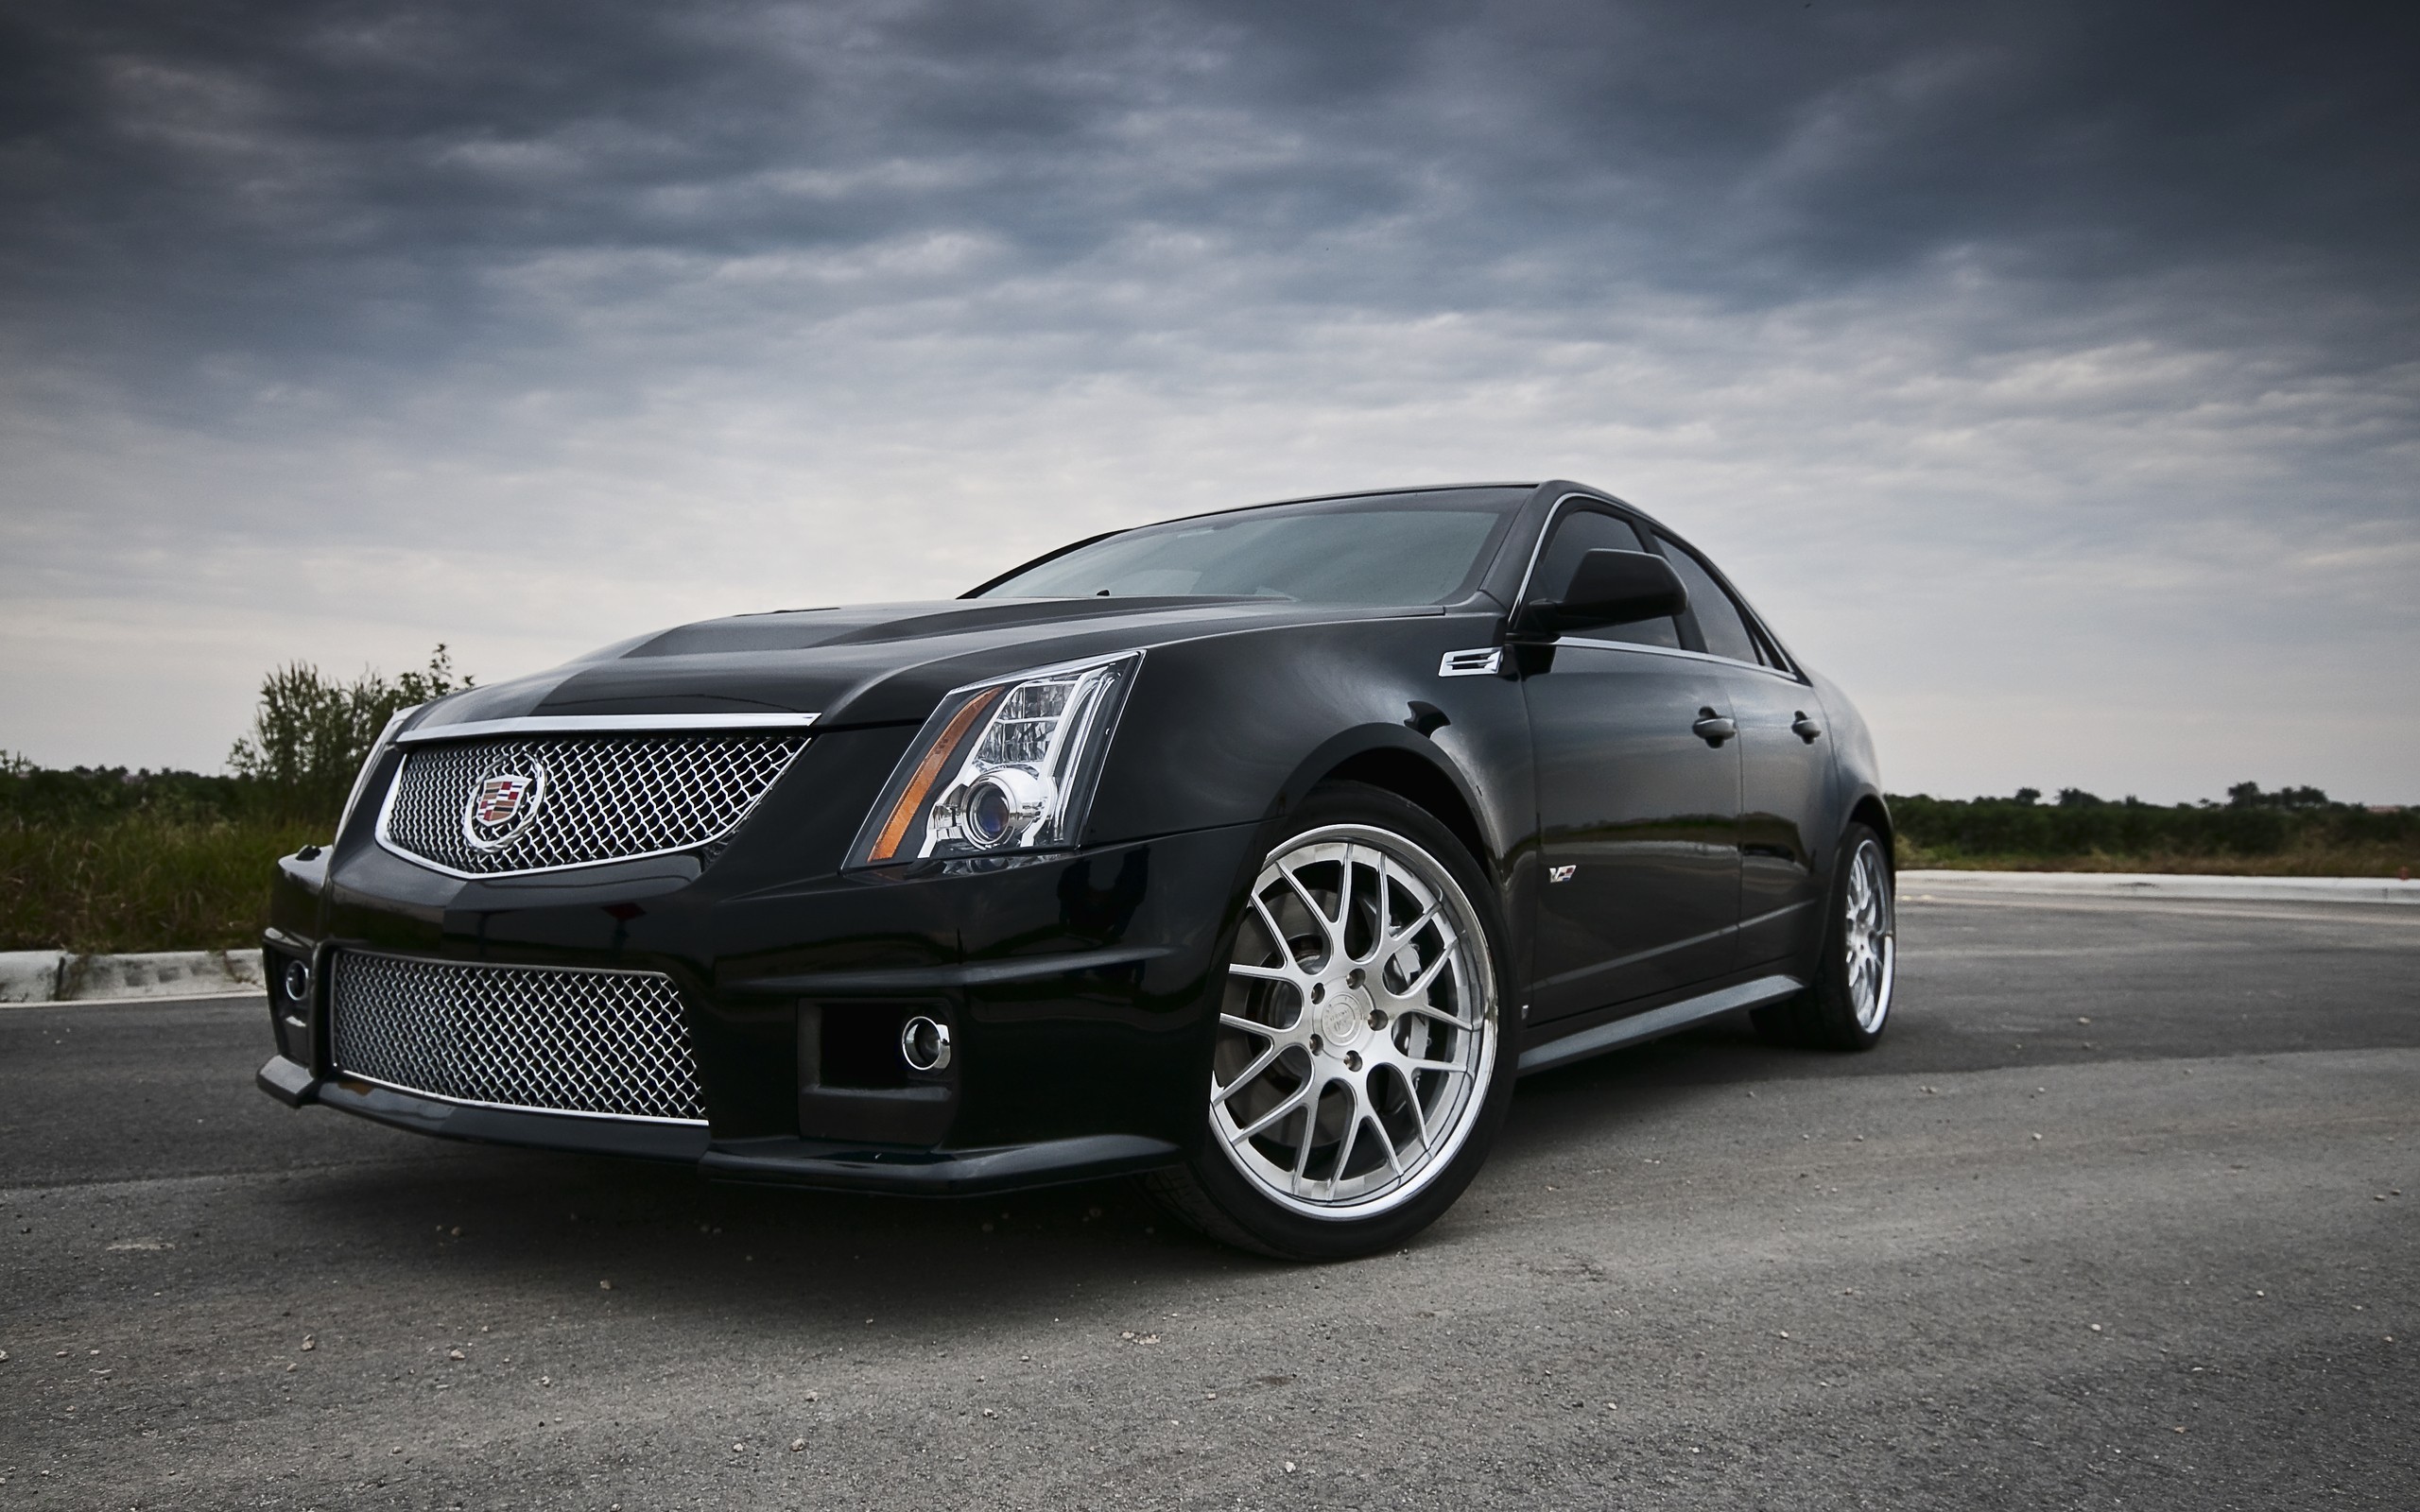 black, Cars, Vehicles, Supercars, Tuning, Wheels, Racing, Sports, Cars, Luxury, Sport, Cars, Cadillac, Cts, Speed, Automobiles Wallpaper